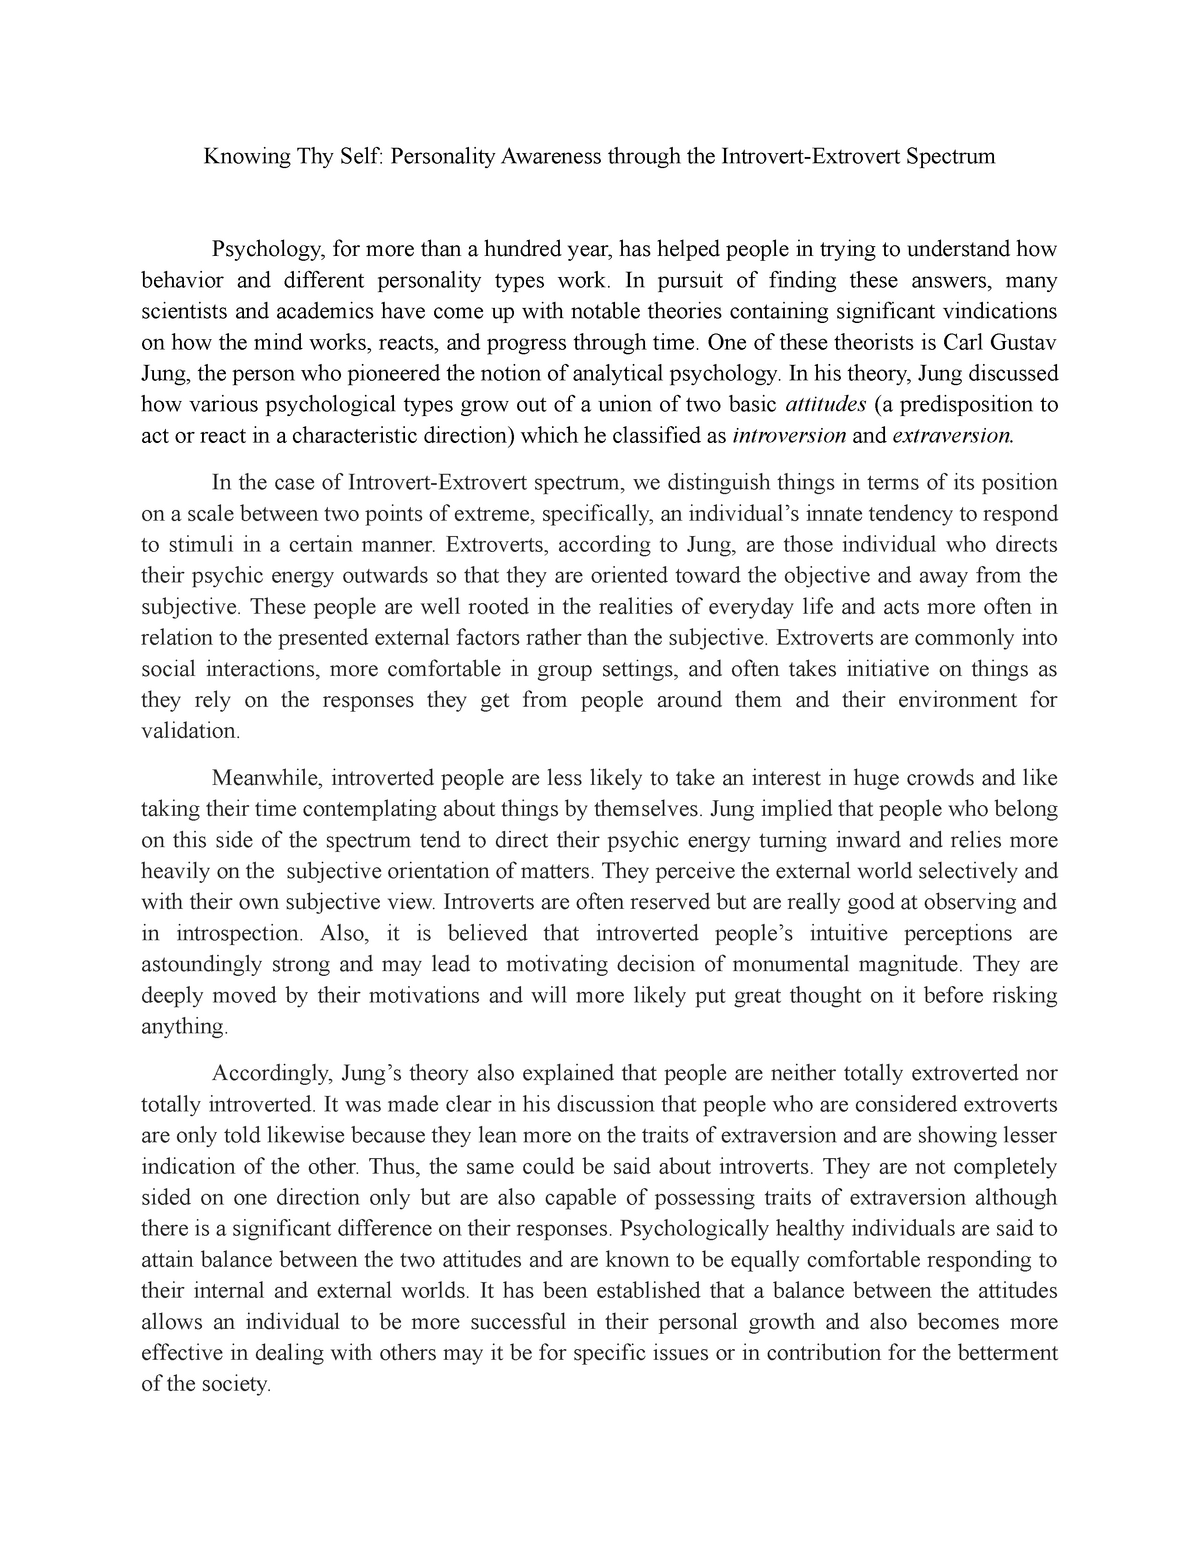 importance of understanding the self essay brainly